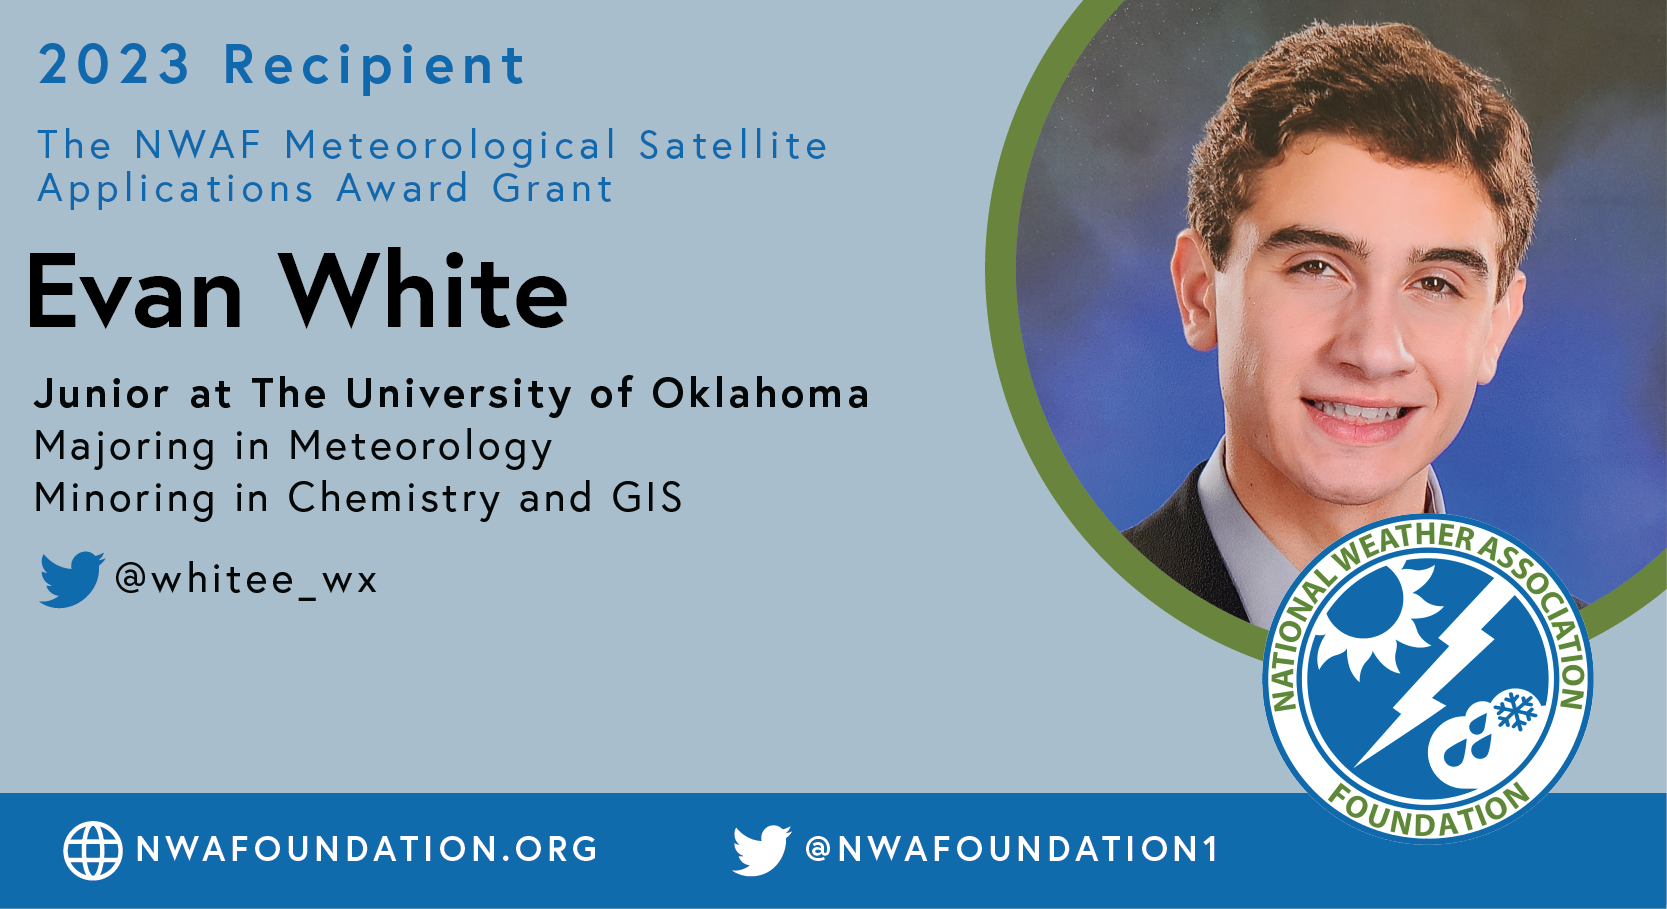 Evan White Junior at The University of Oklahoma Studying Meteorology with minors in Chemistry and GIS